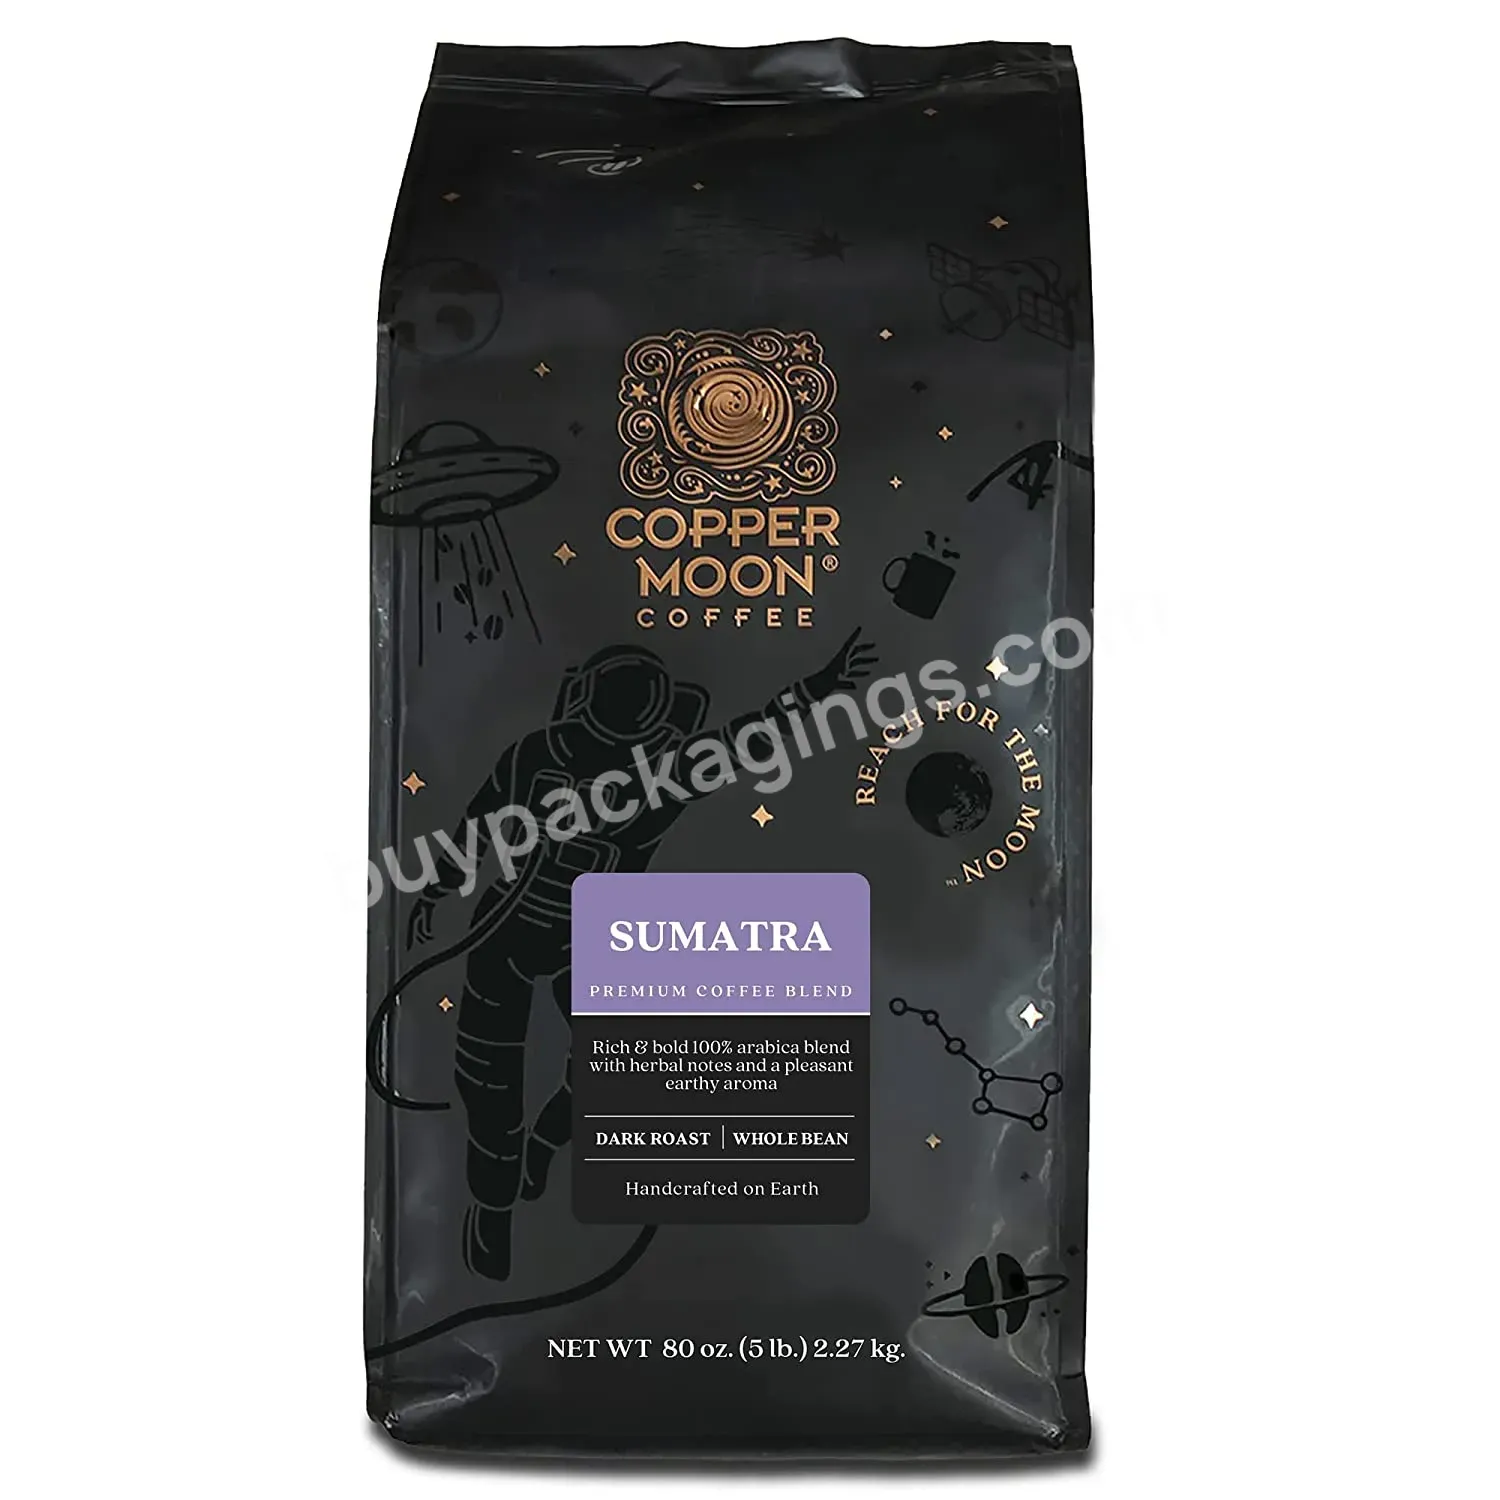 Tea Dry Goods Food Grade Packaging Pouch Packing Cheap 2 Kg 250gr Stand Up Coffee Bags Put Seeds With Window - Buy Coffee Bags,2022 Custom Printed Coffee Tea Bags With Valve 250g 500g 1kg Kraft Paper Zipper Recyclable Coffee Bags,Resealable Food Grad